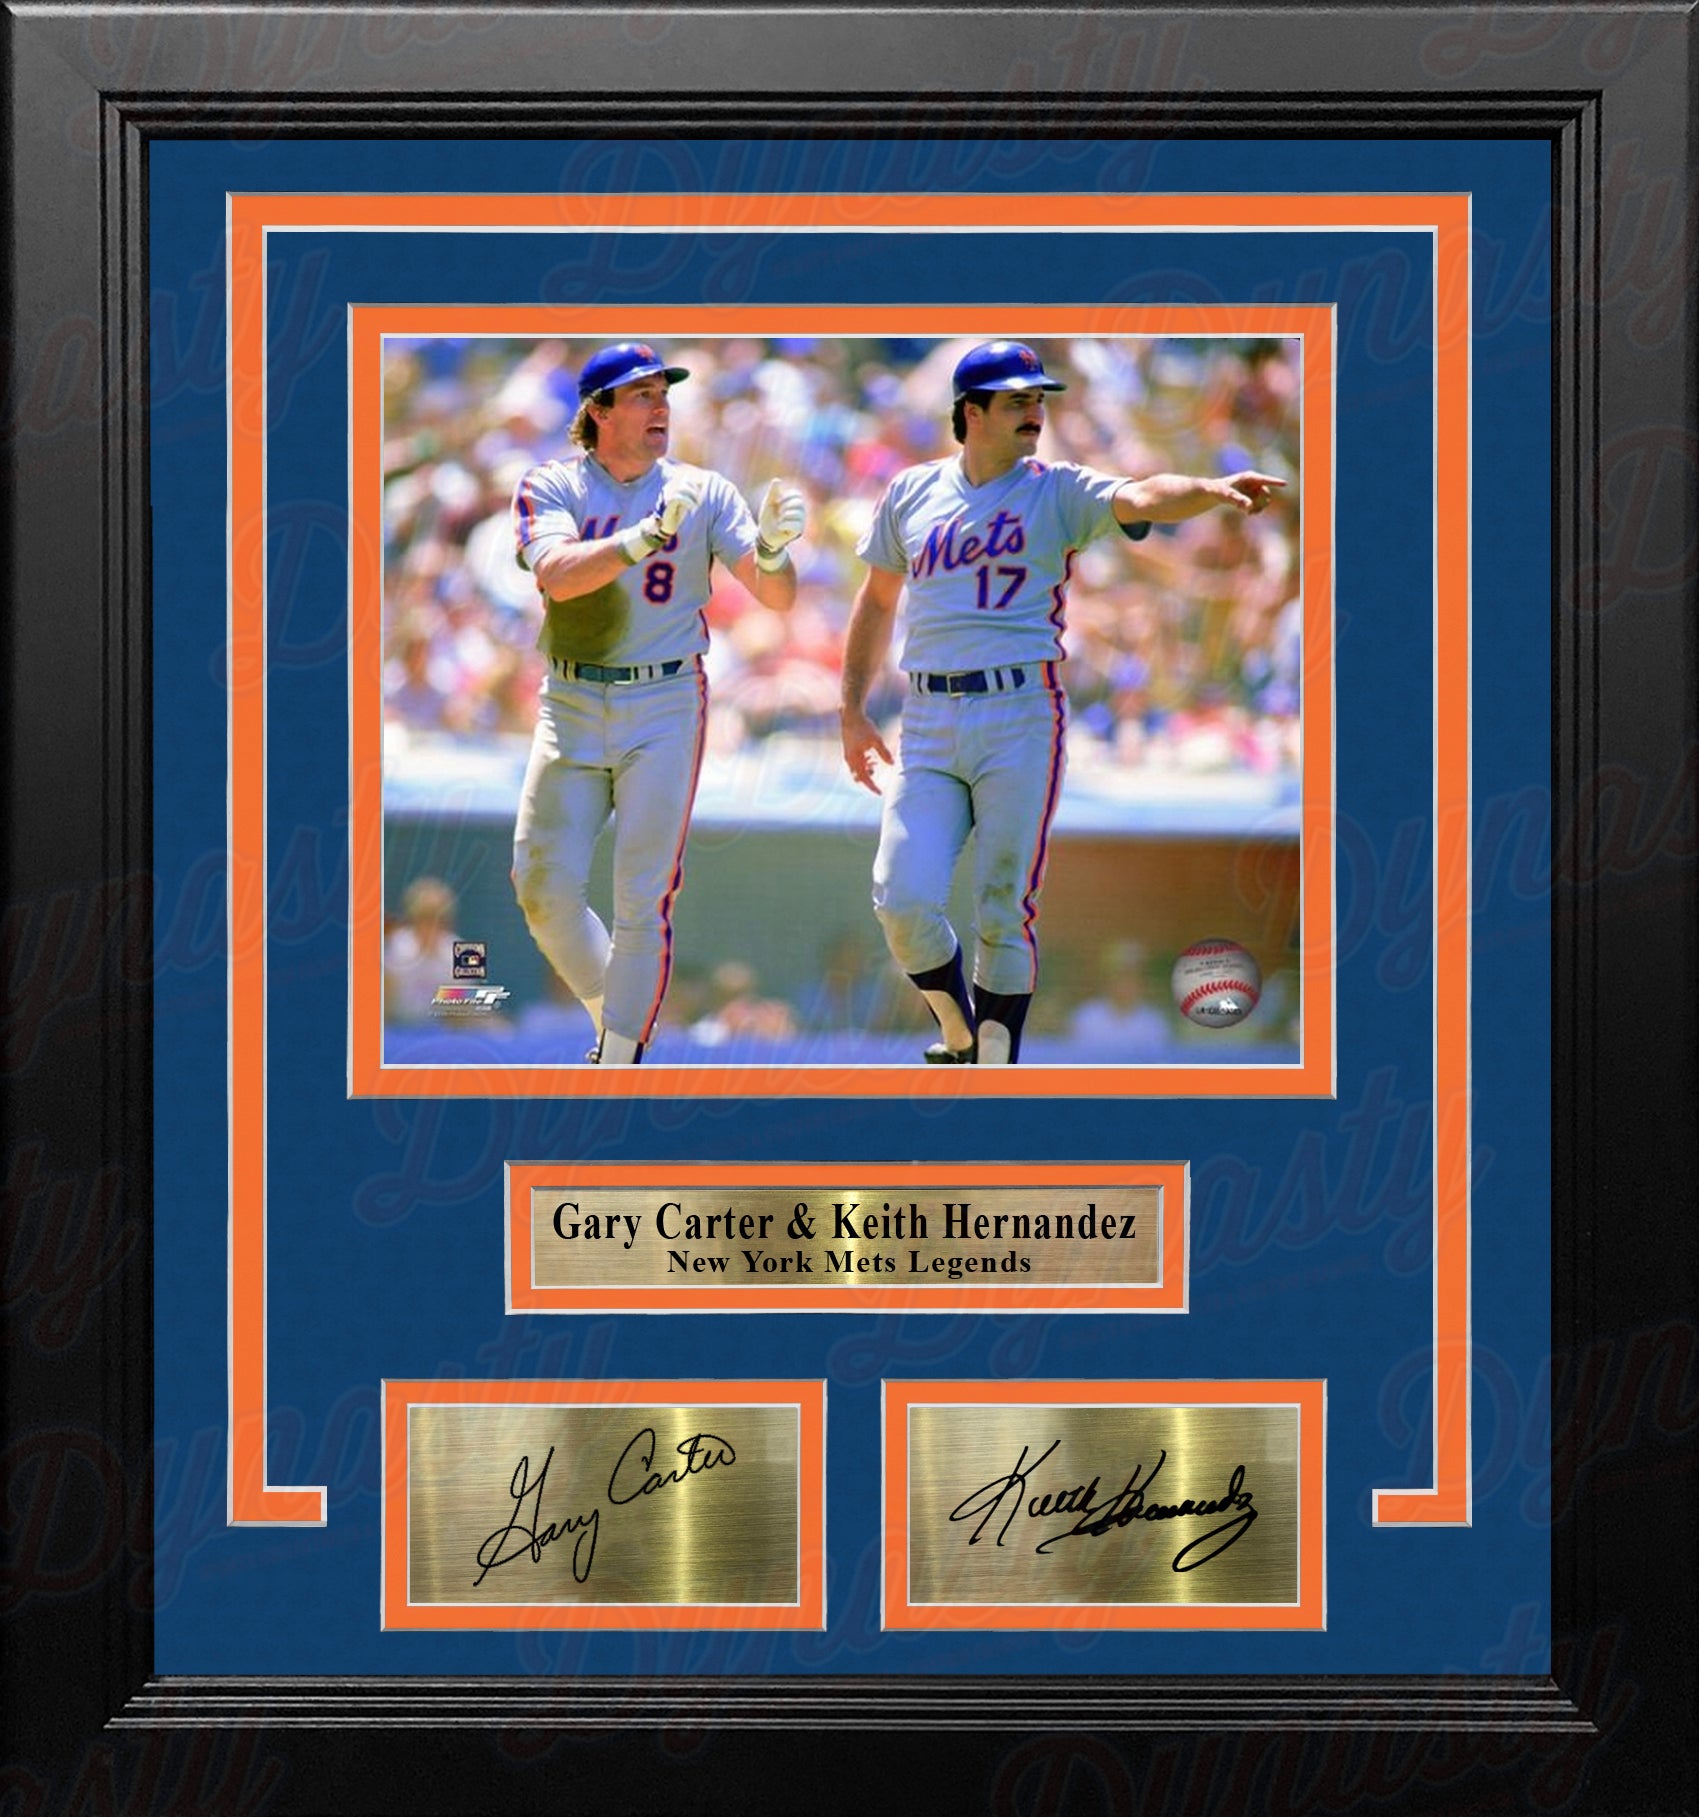 Gary Carter & Keith Hernandez in Action New York Mets 8 x 10 Framed Photo  with Engraved Autographs - Dynasty Sports & Framing